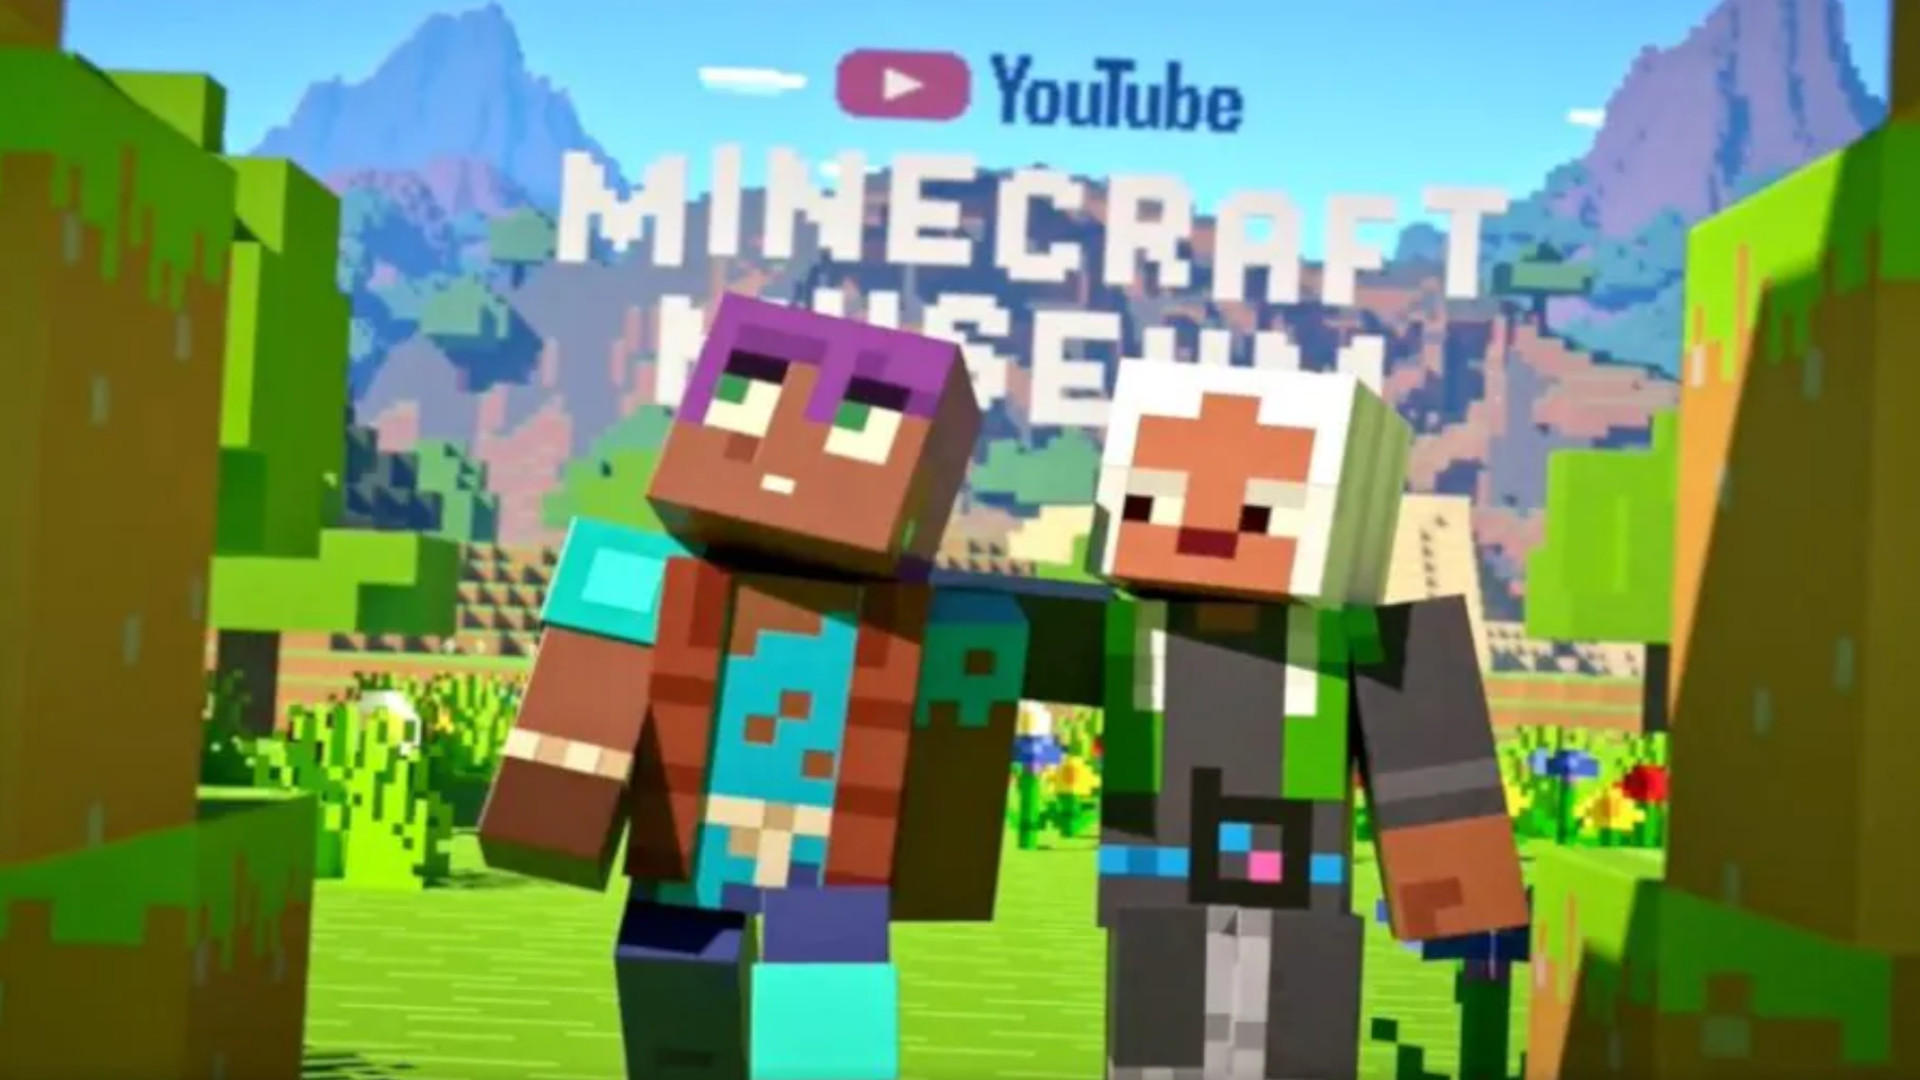 Minecraft is the first game to hit one trillion views on YouTube